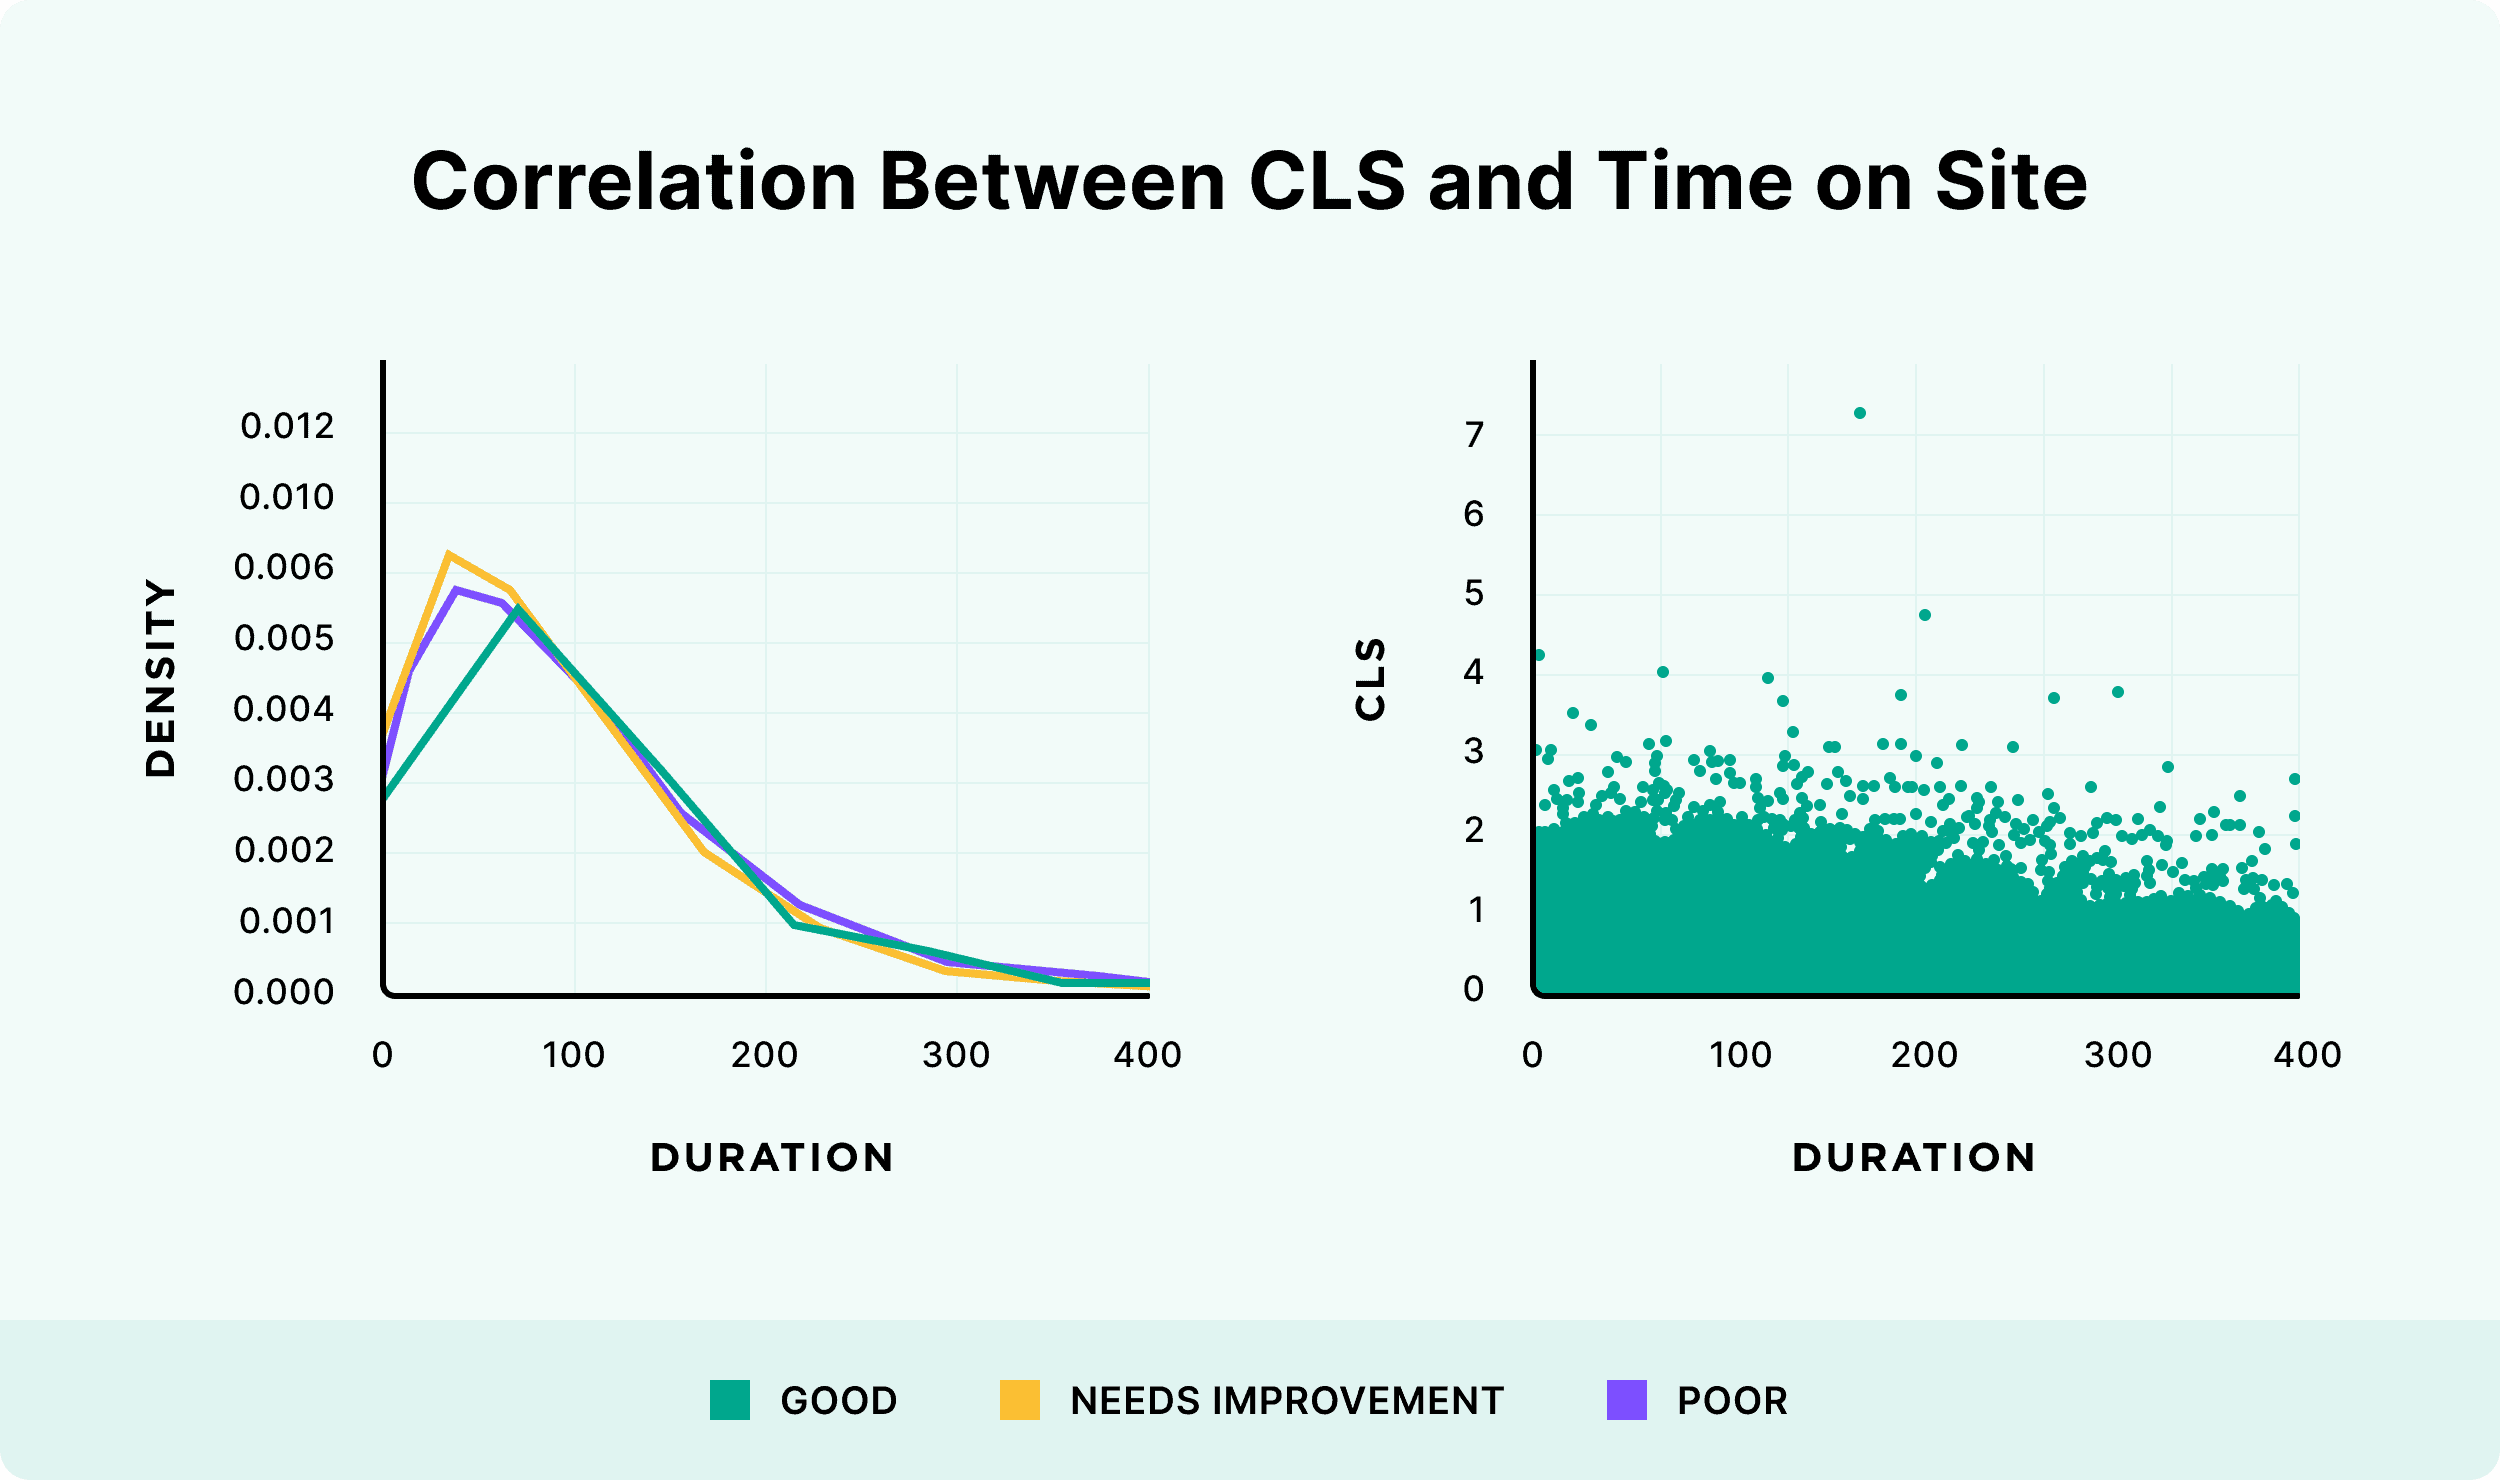 Correlation between CLS and time on site